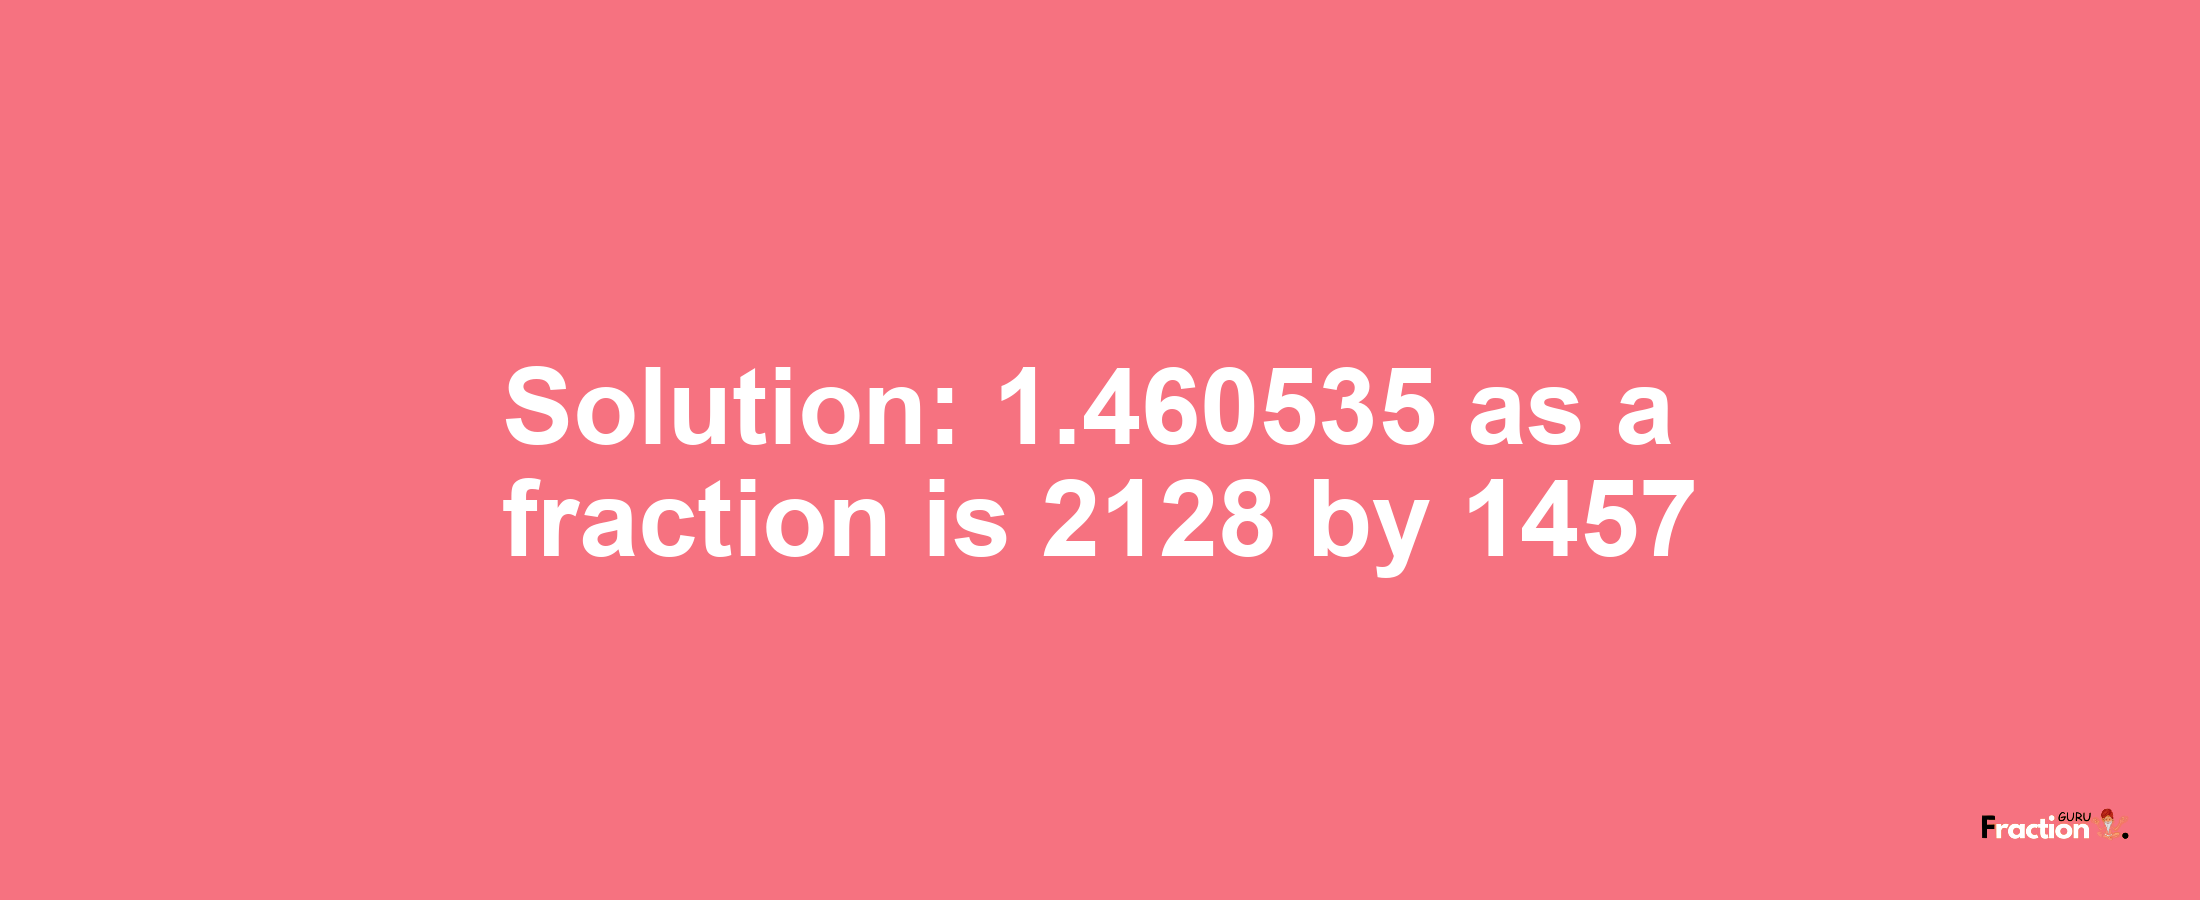 Solution:1.460535 as a fraction is 2128/1457